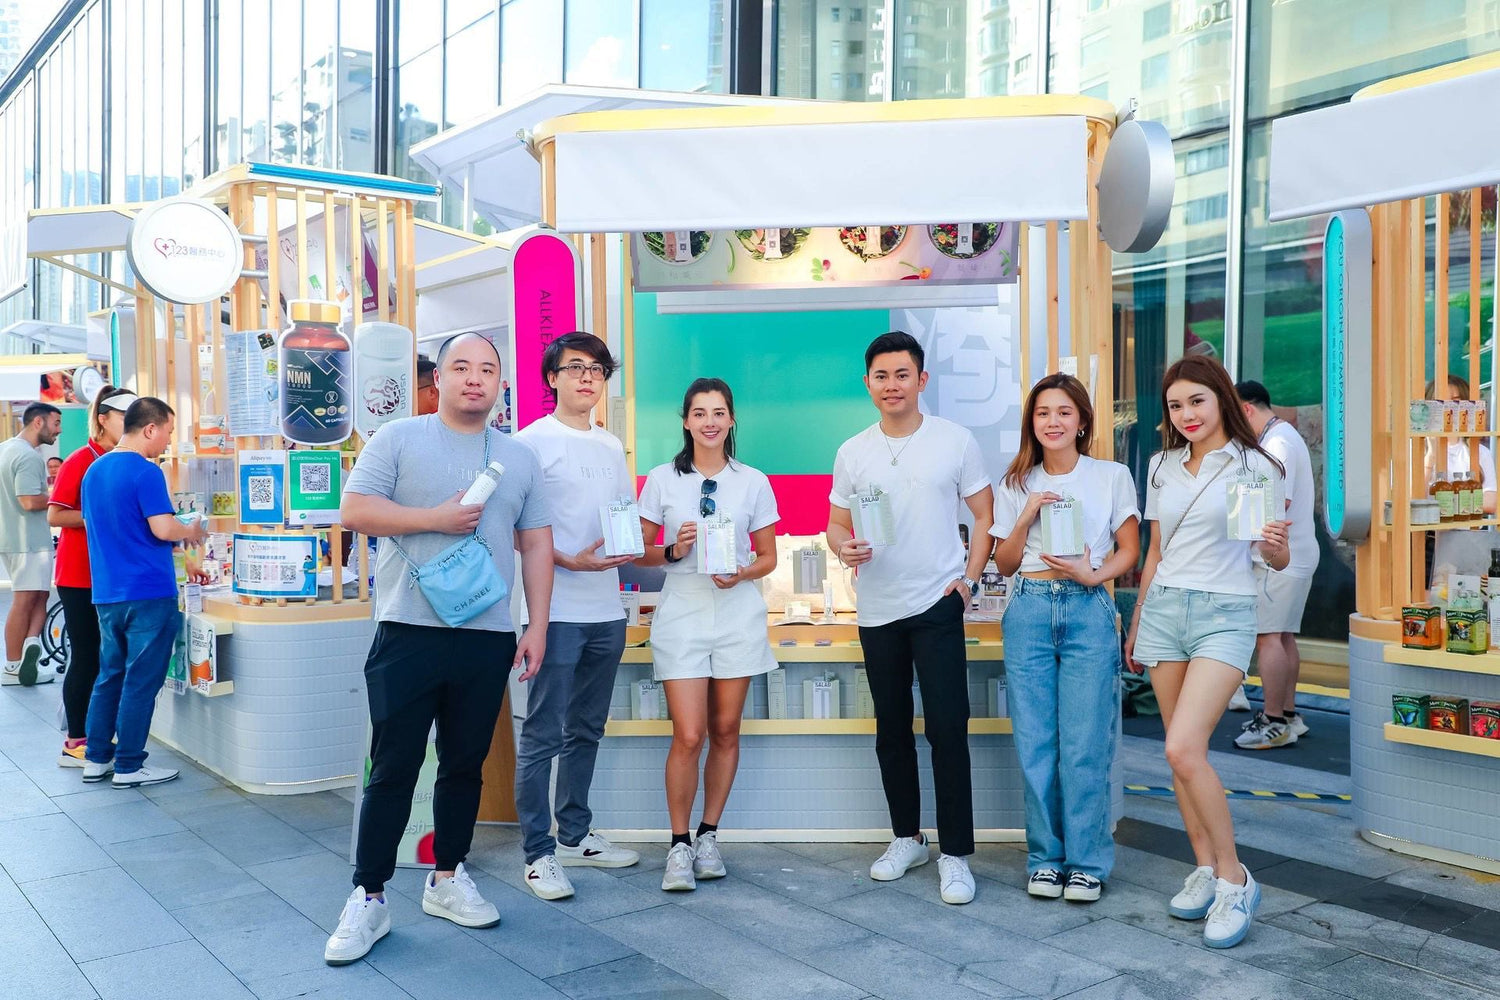 Allklear全清Future Salad參加深圳「港‧潮流」購物節 Allklear Future Salad participates in Shenzhen's "CHIC Hong Kong" Shopping Festival